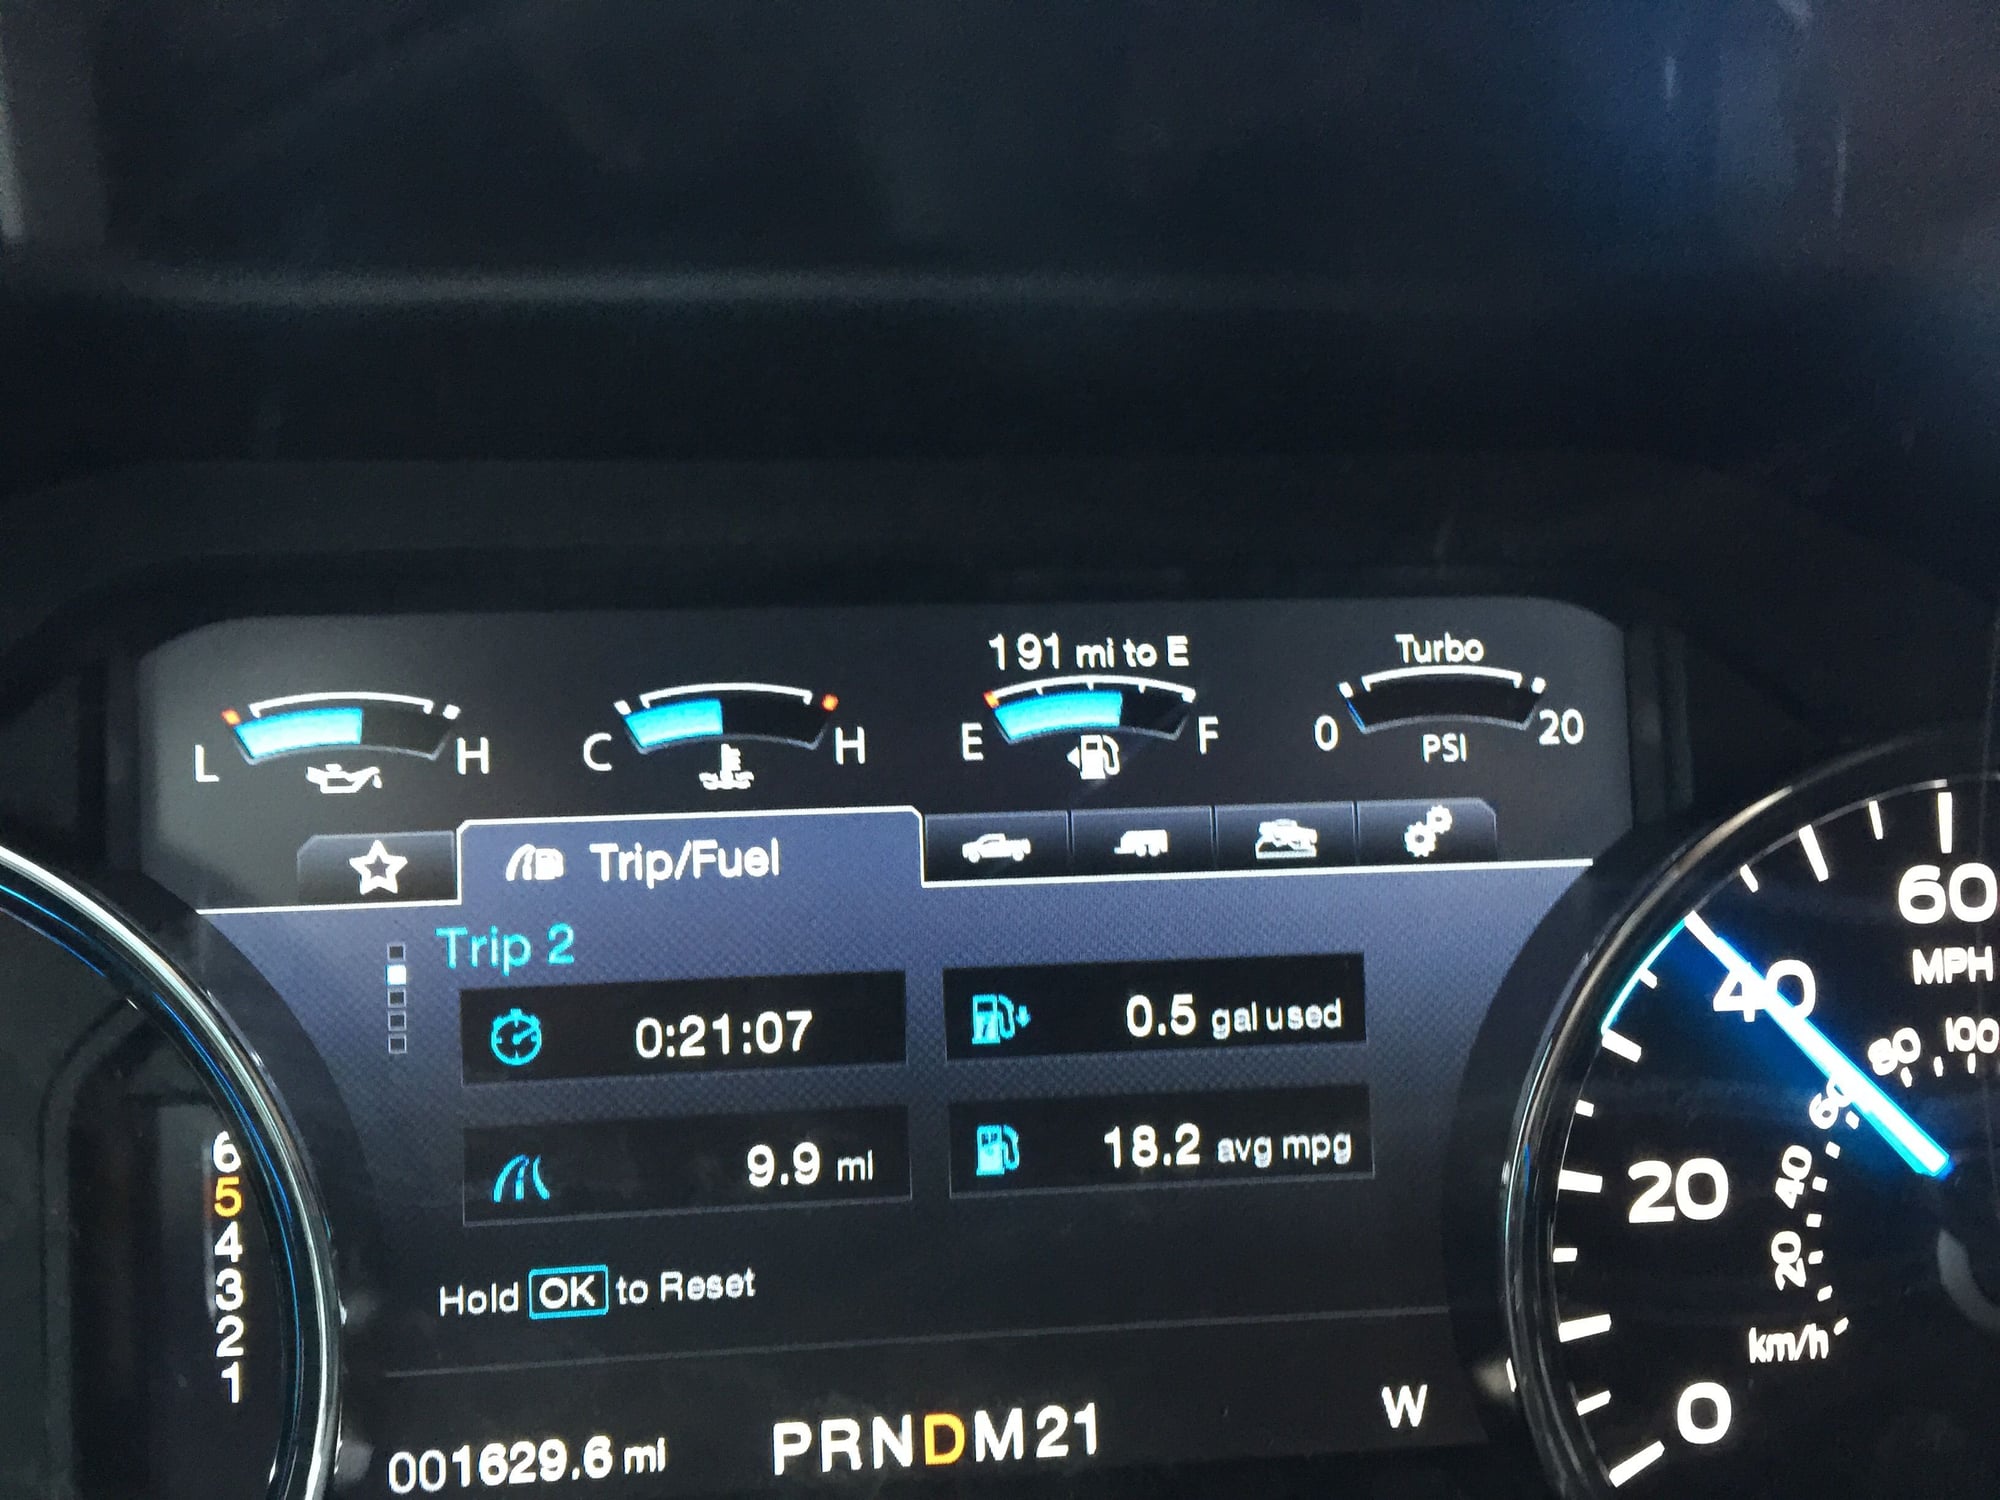 2015 F150 3.5l ecoboost Bad fuel mileage - Page 4 - Ford Truck 2015 F150 3.5 Ecoboost Poor Gas Mileage